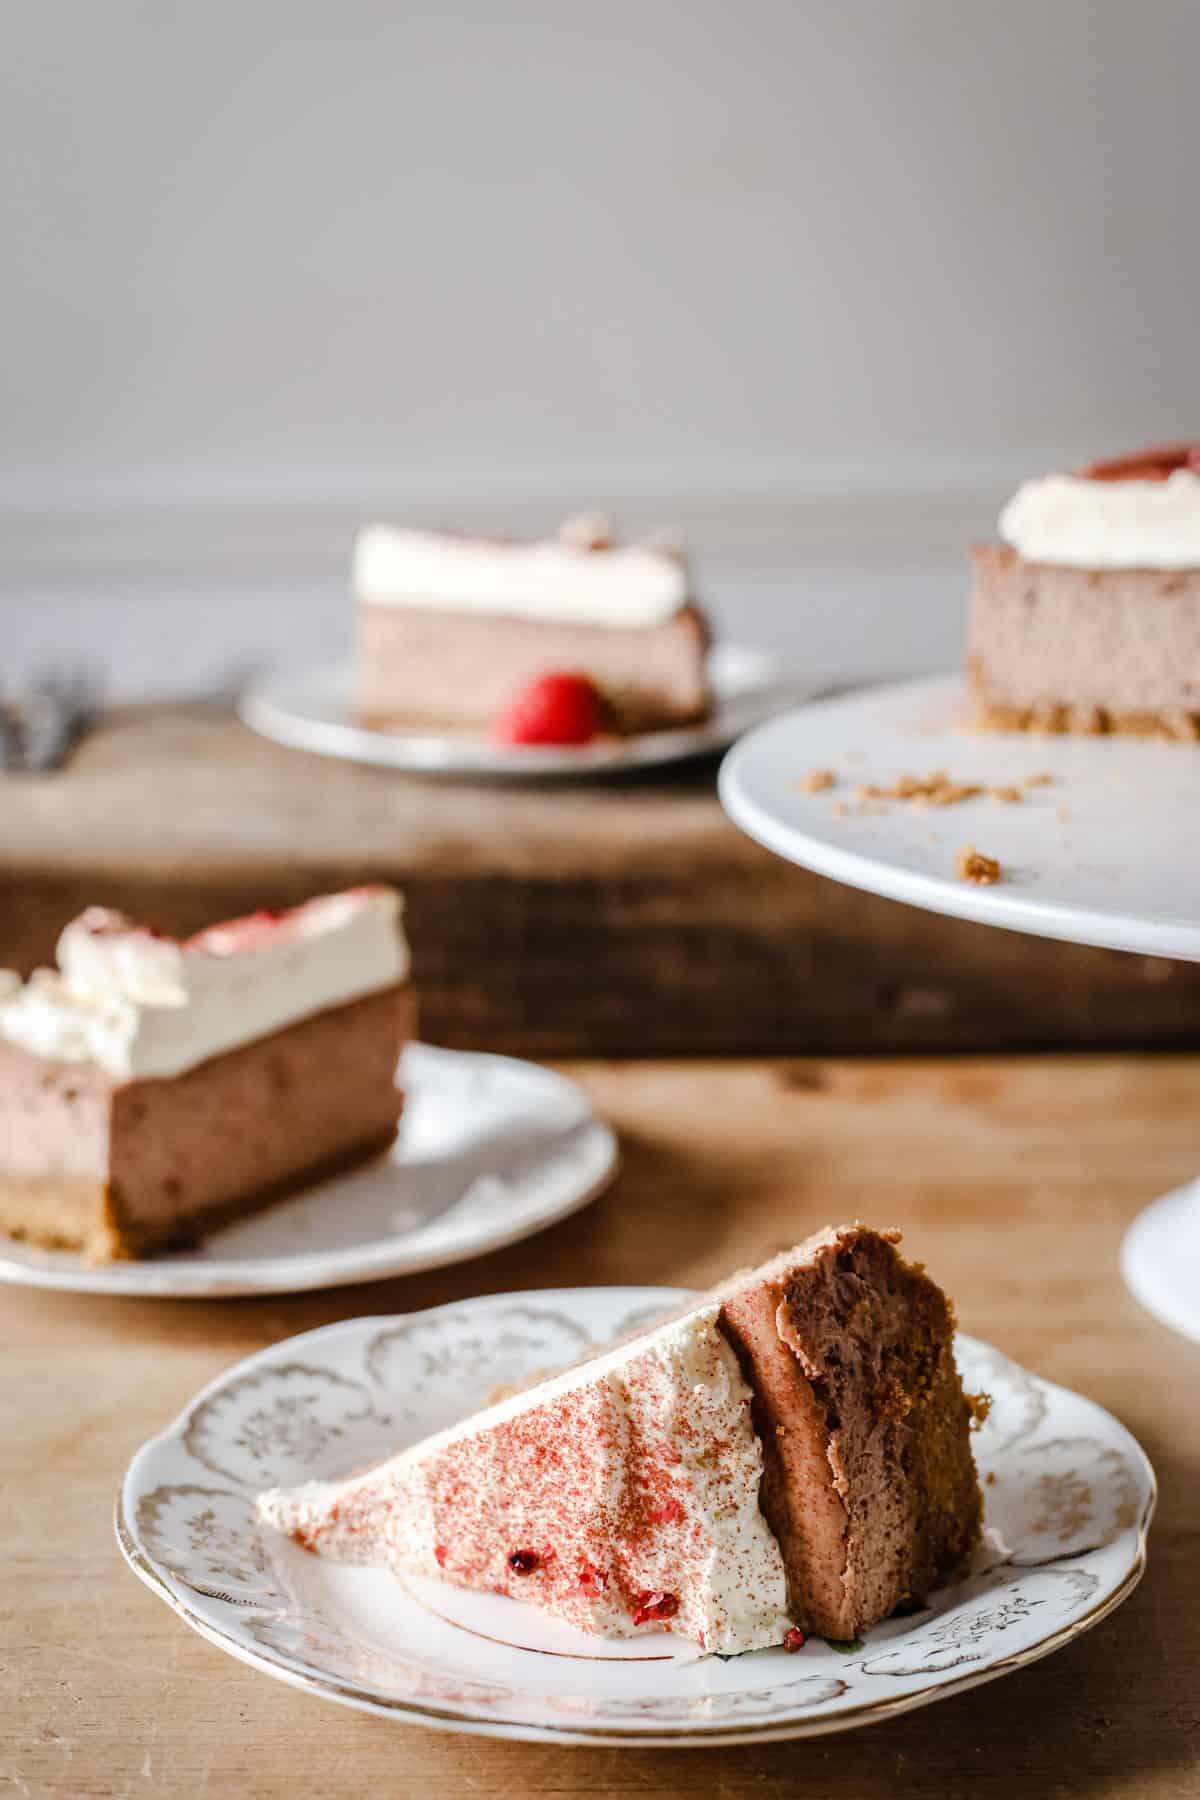 A slice of Strawberry Pink Peppercorn Cheesecake on a plate in the front of the image with plates of cheesecake behind